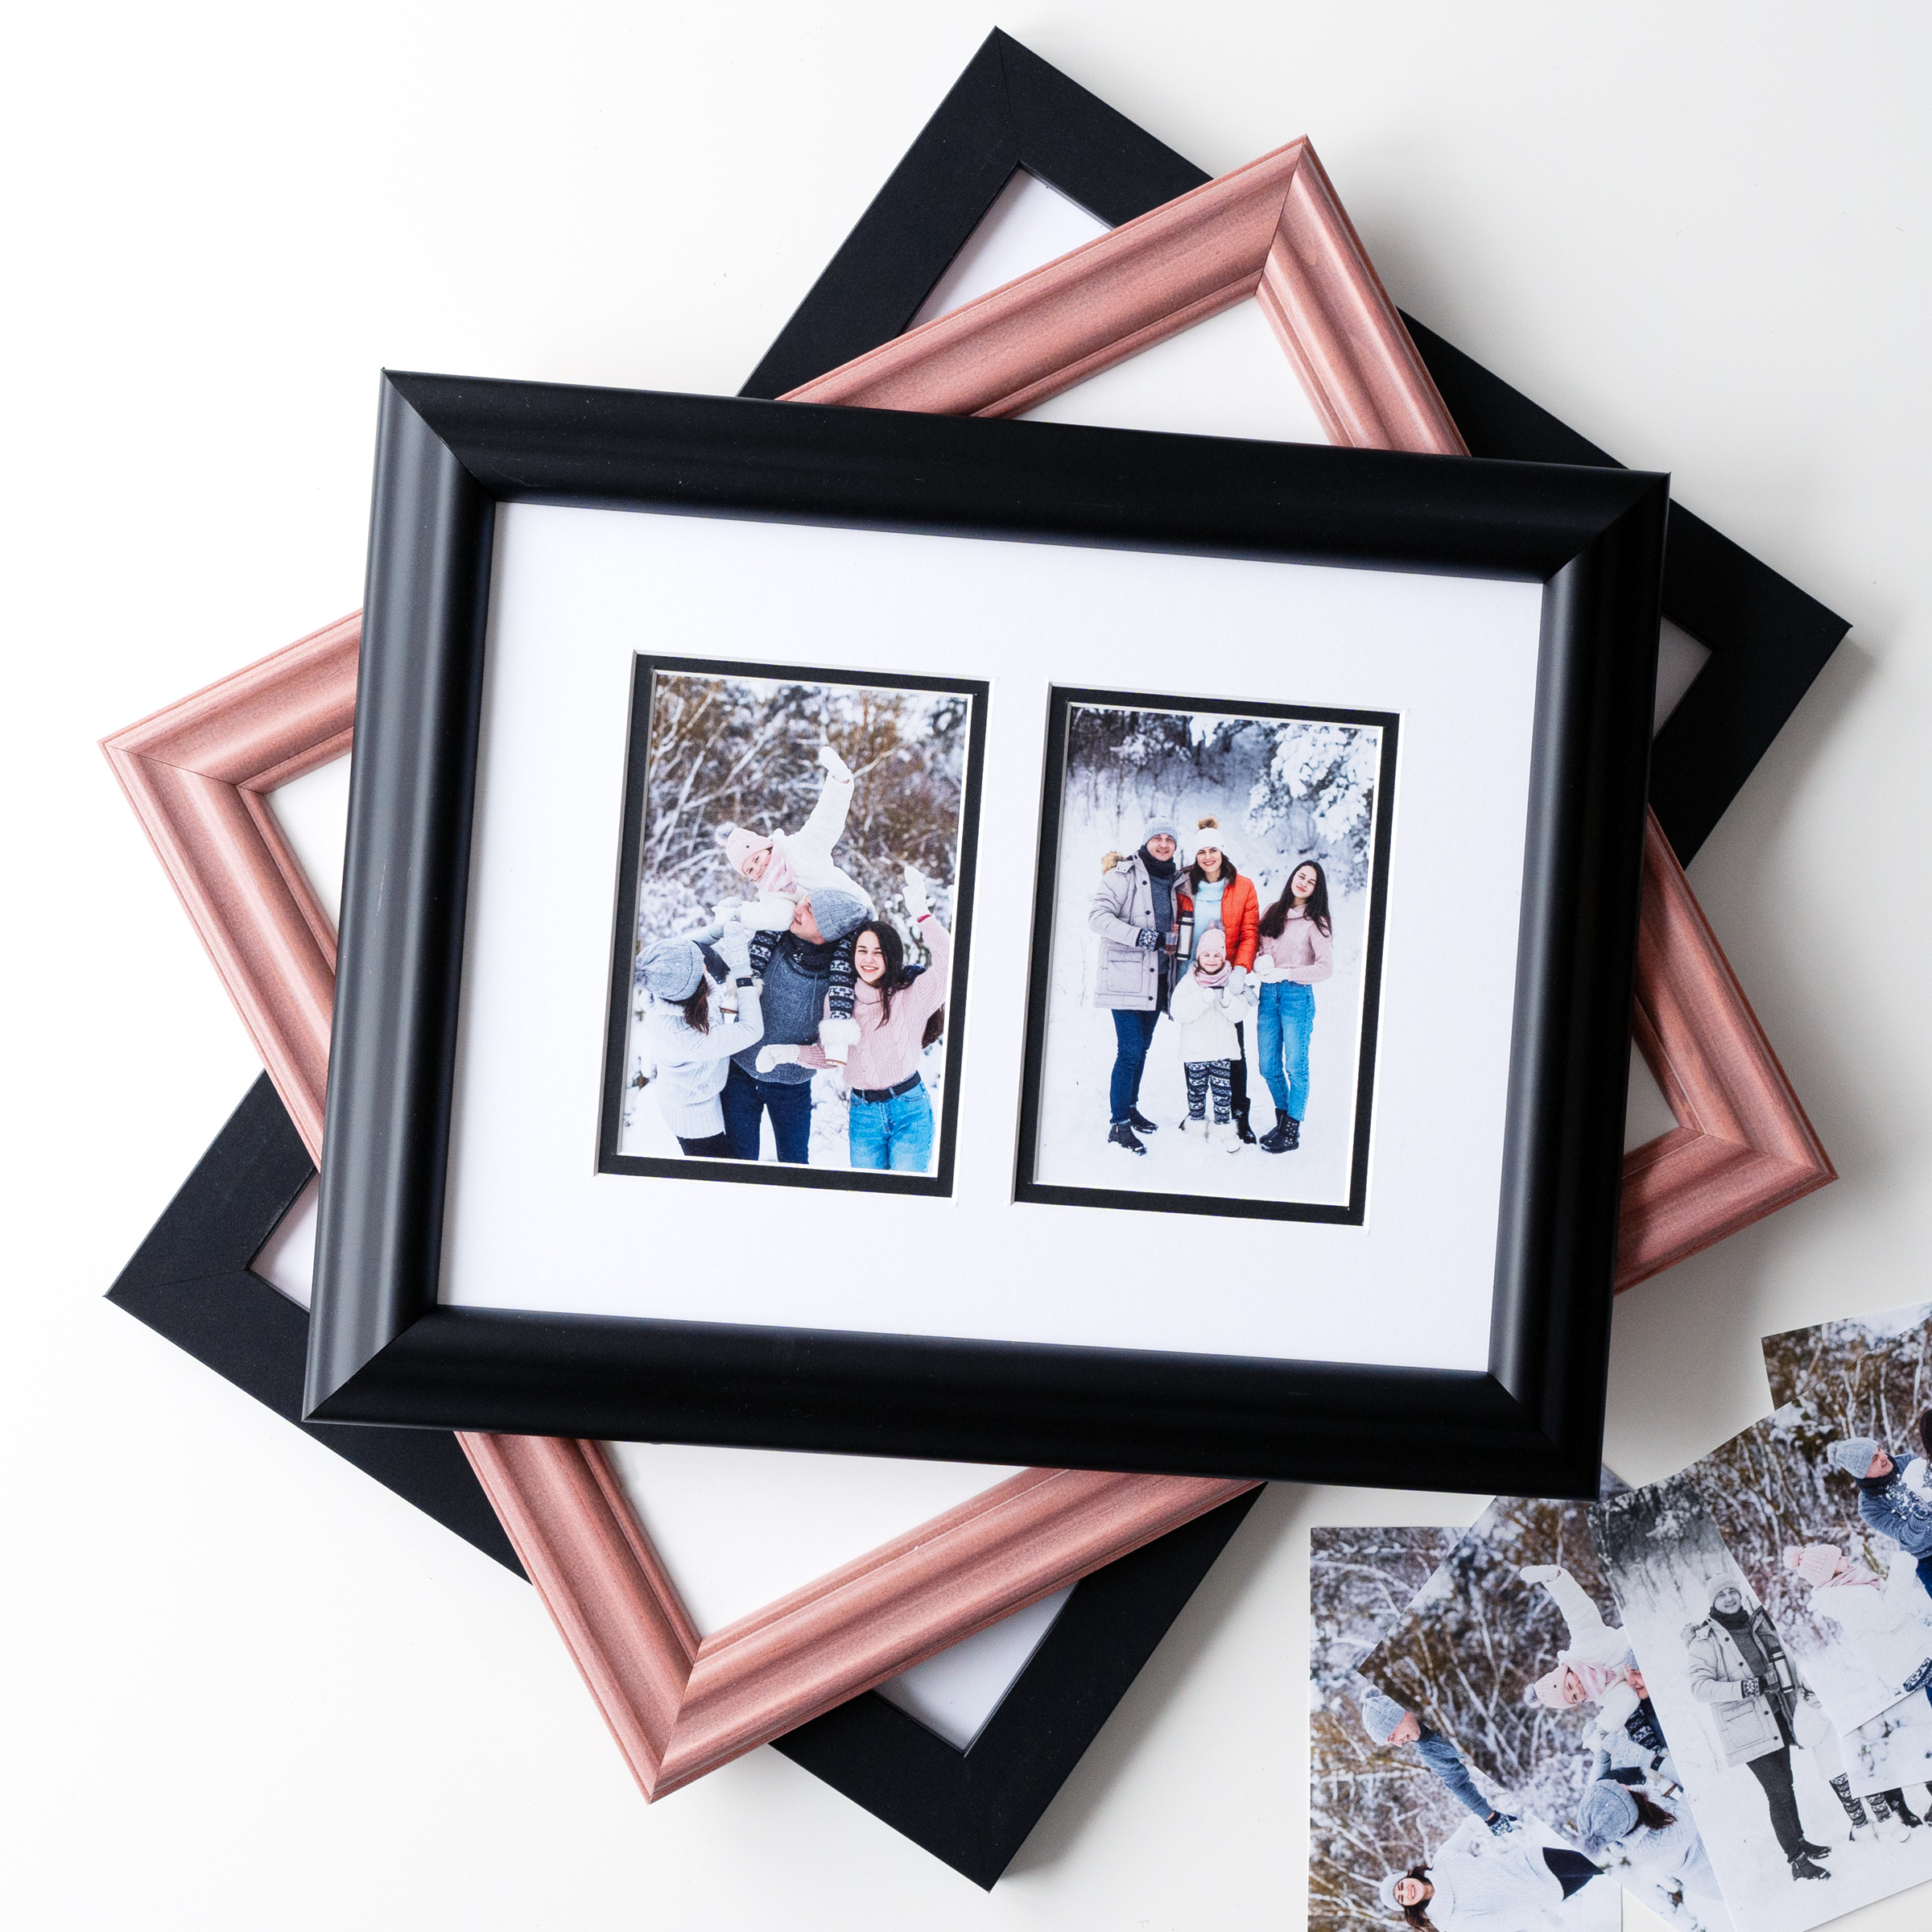 Collage Picture Frames